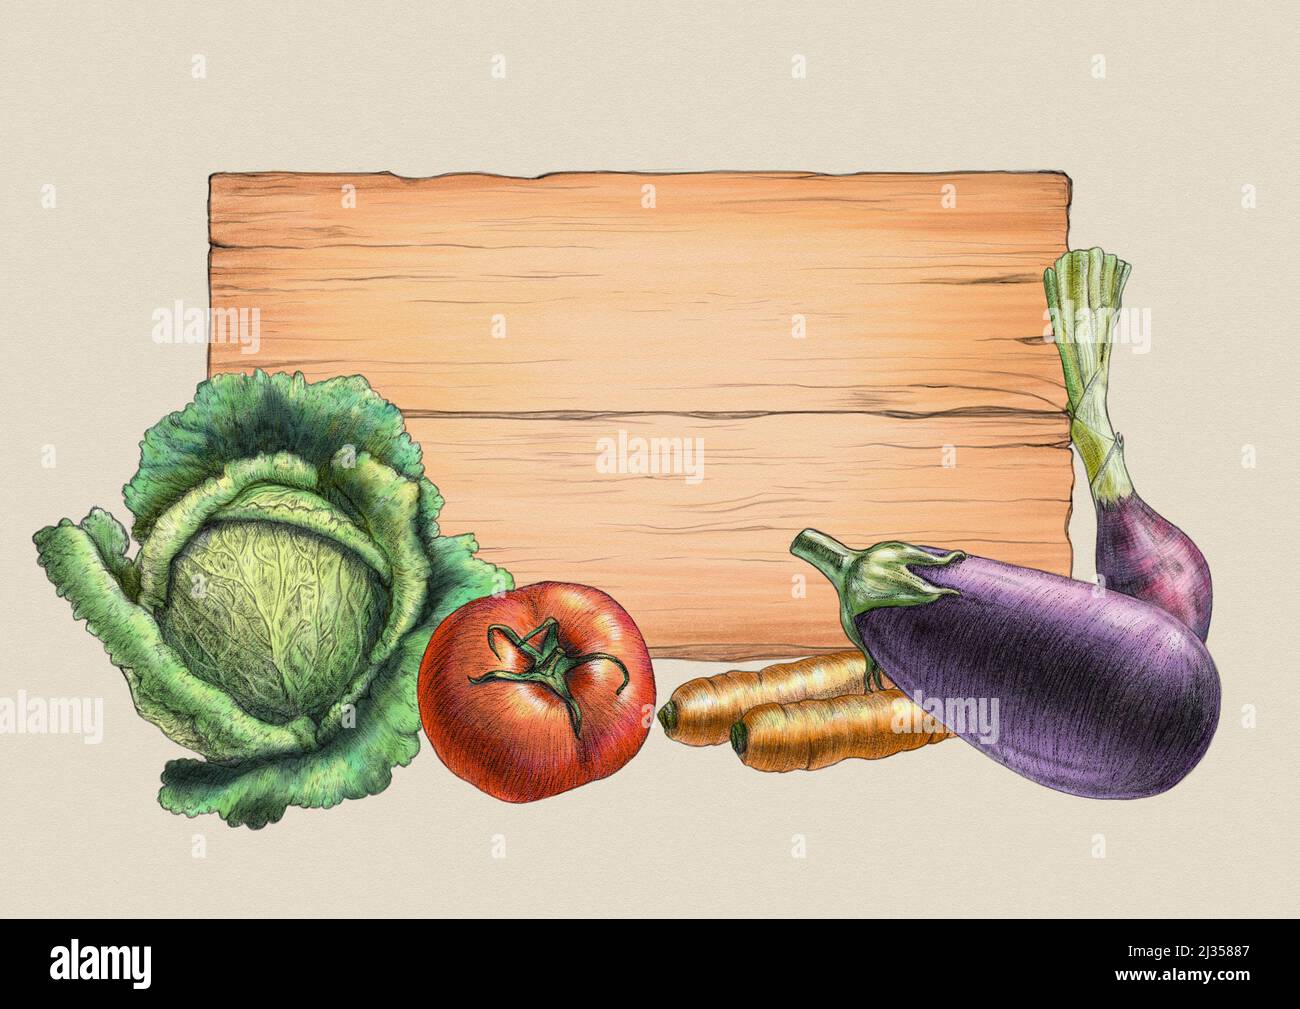 Assorted vegetables with a wood sign. Digital illustration. Stock Photo